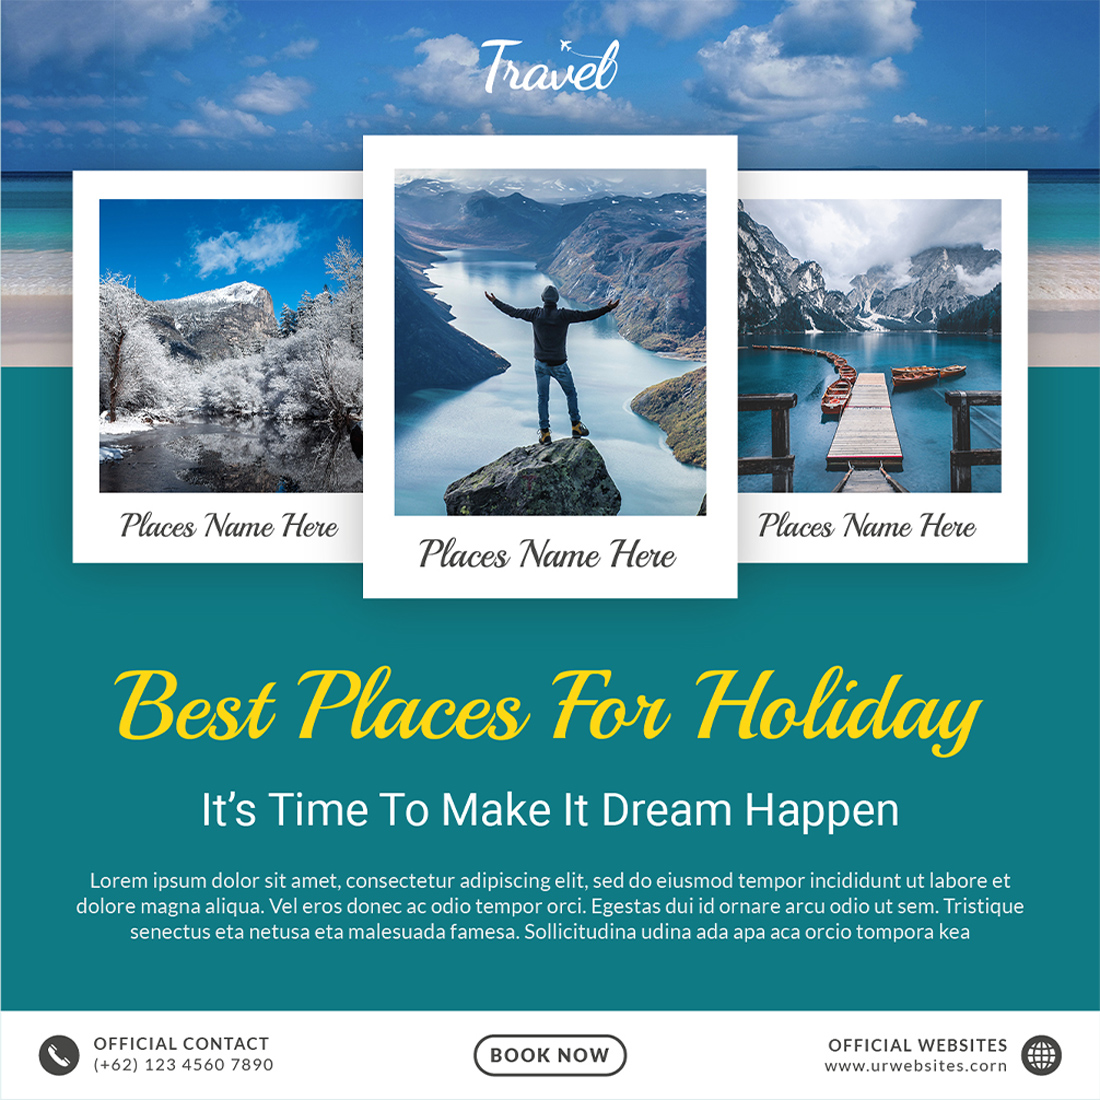 Leisure & Travel Social Media Post Templates best places for holiday.